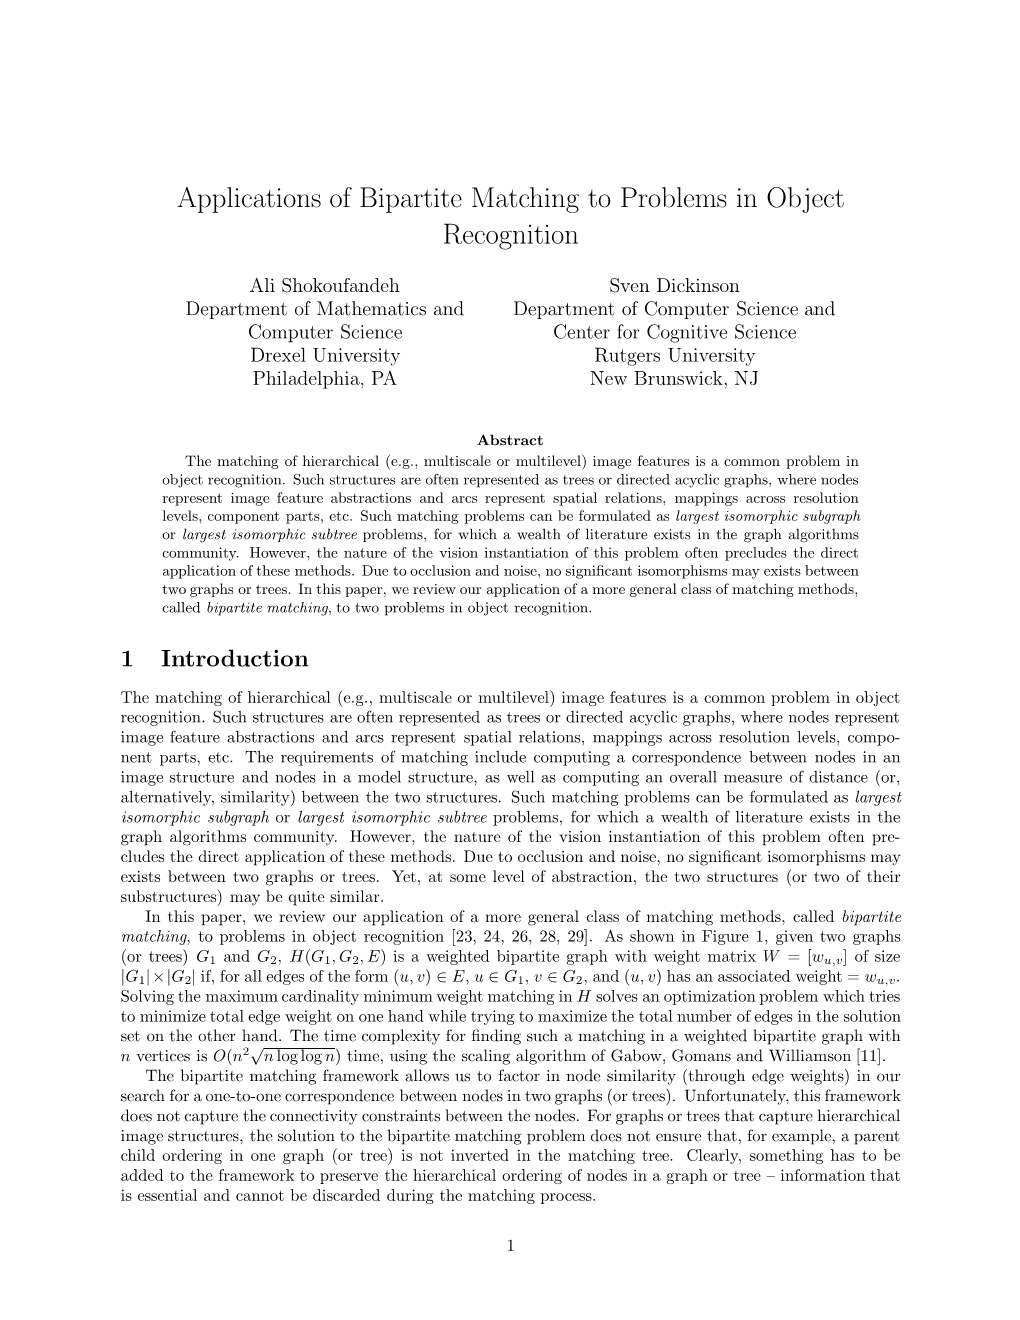 Applications of Bipartite Matching to Problems in Object Recognition